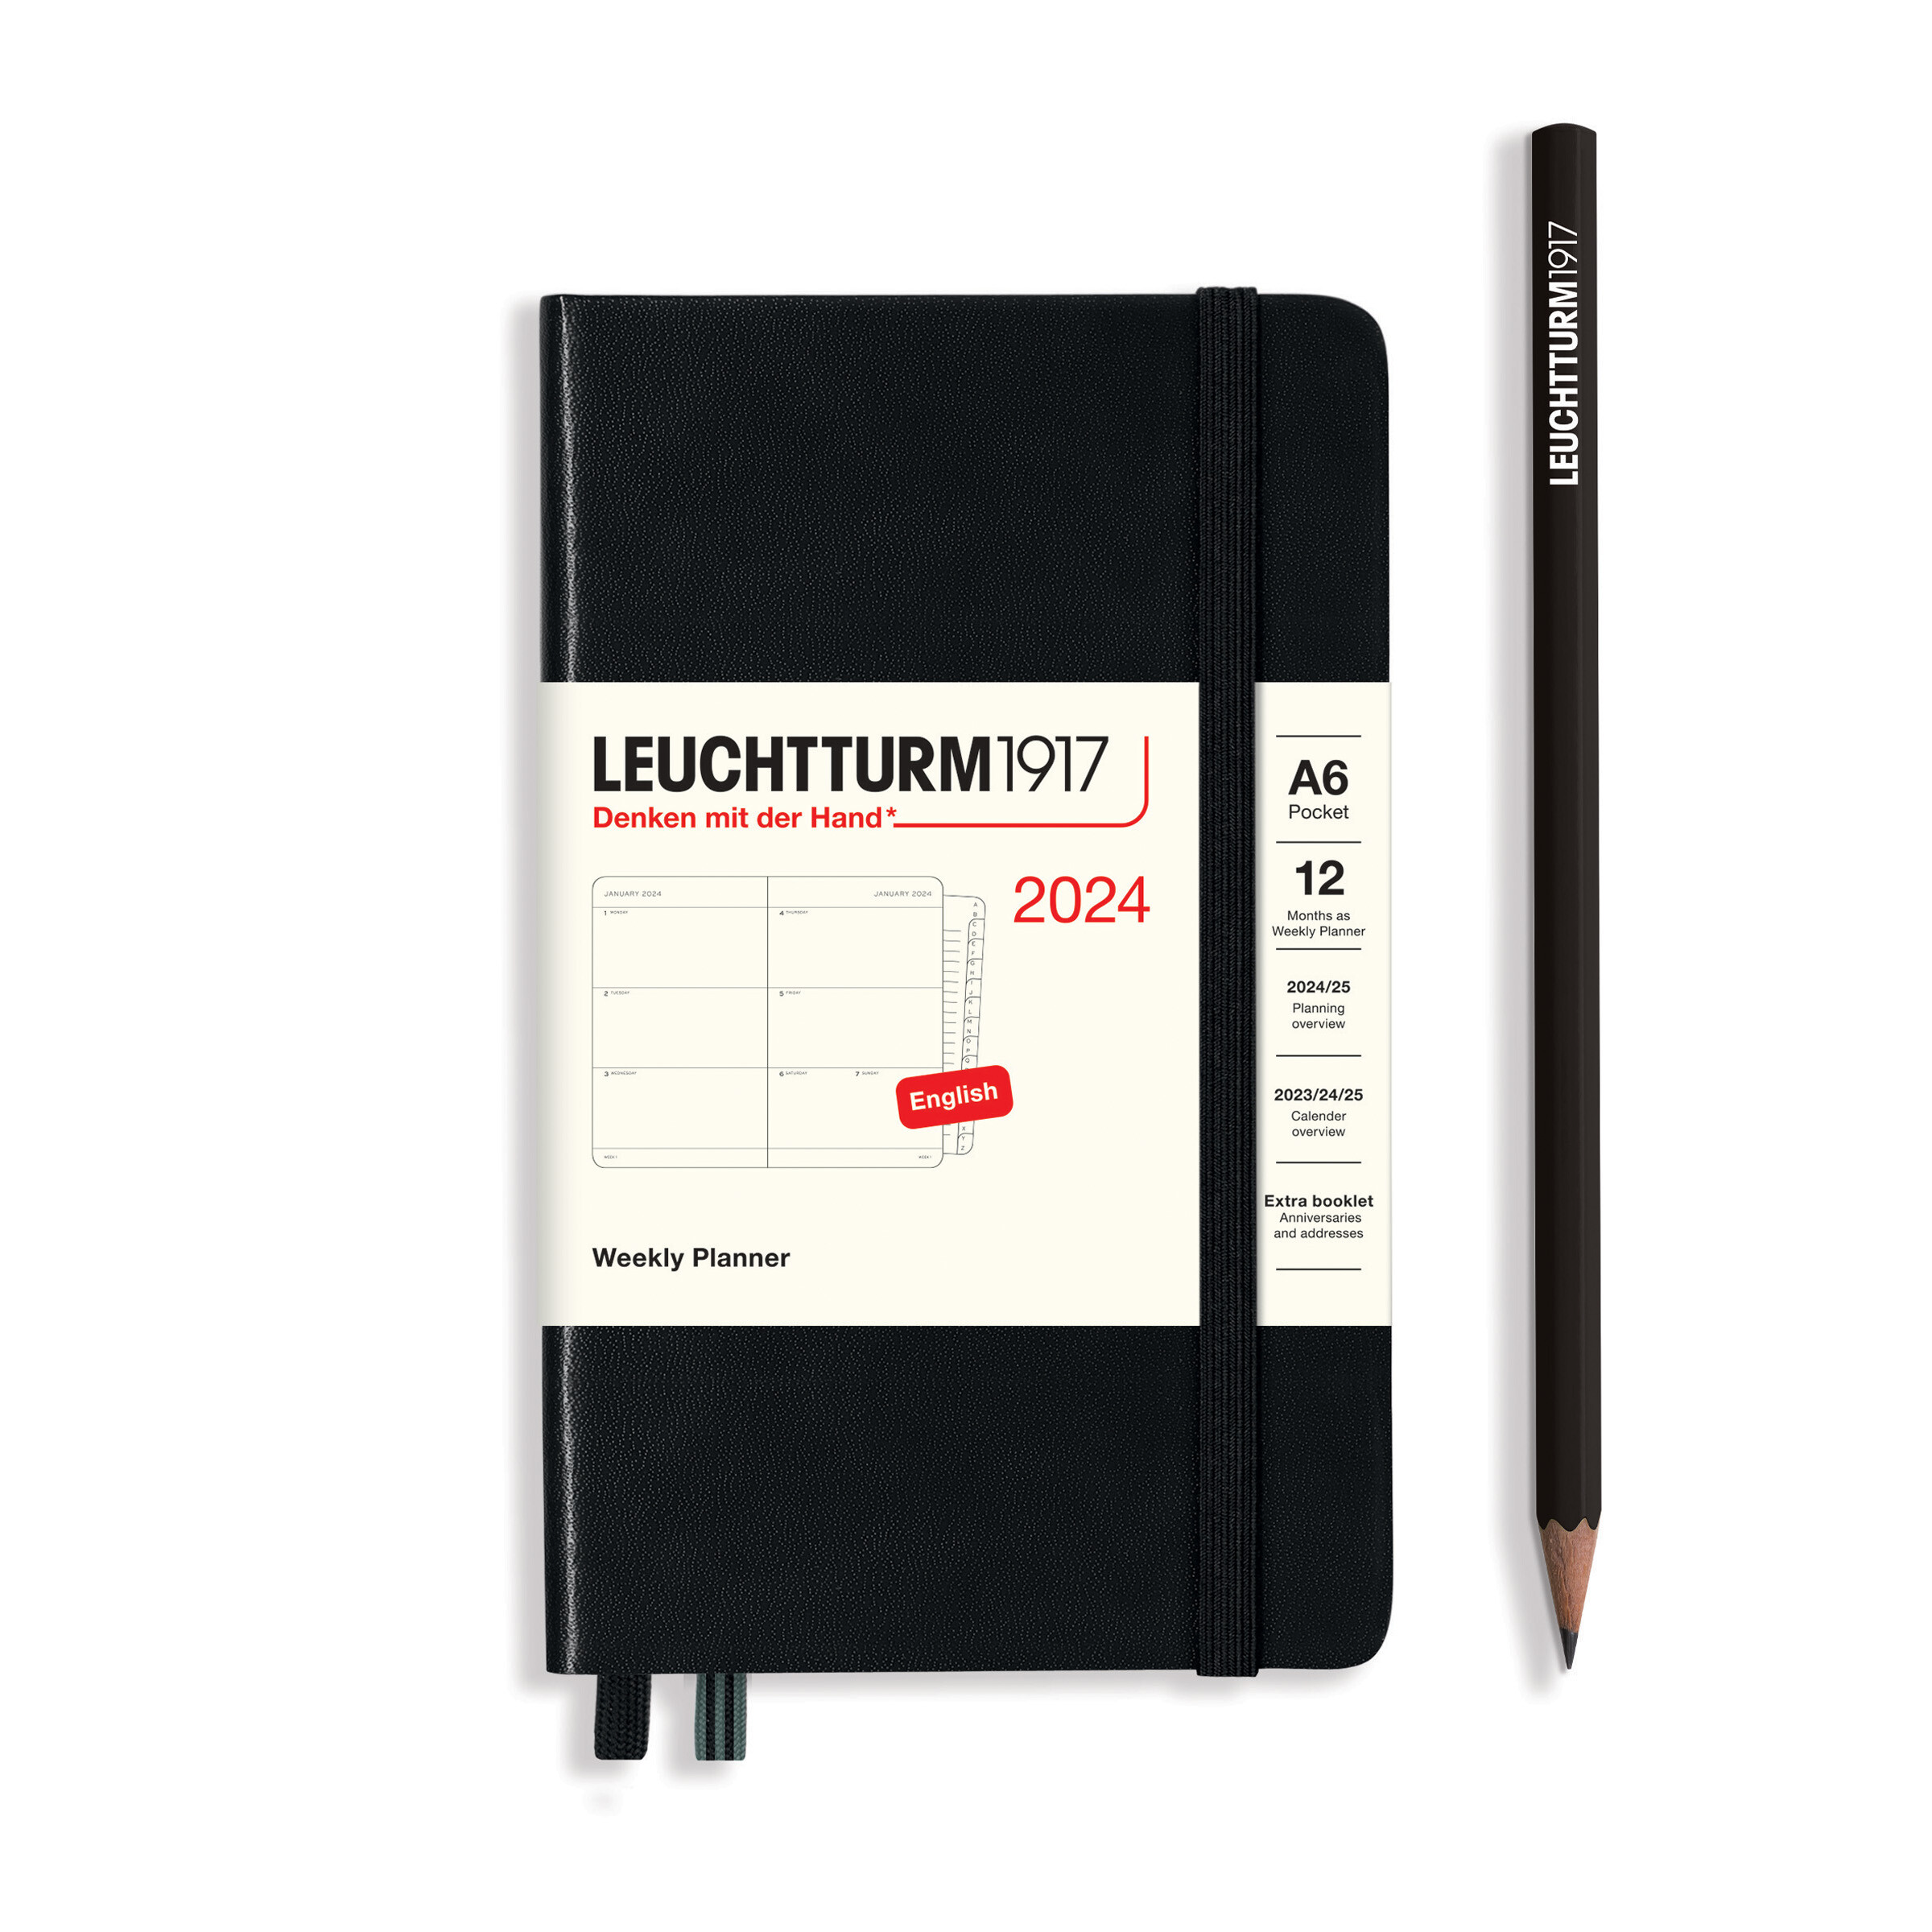 Leuchtturm1917 Weekly Planner Hard Cover Pocket A6 2024 - Pencraft the boutique